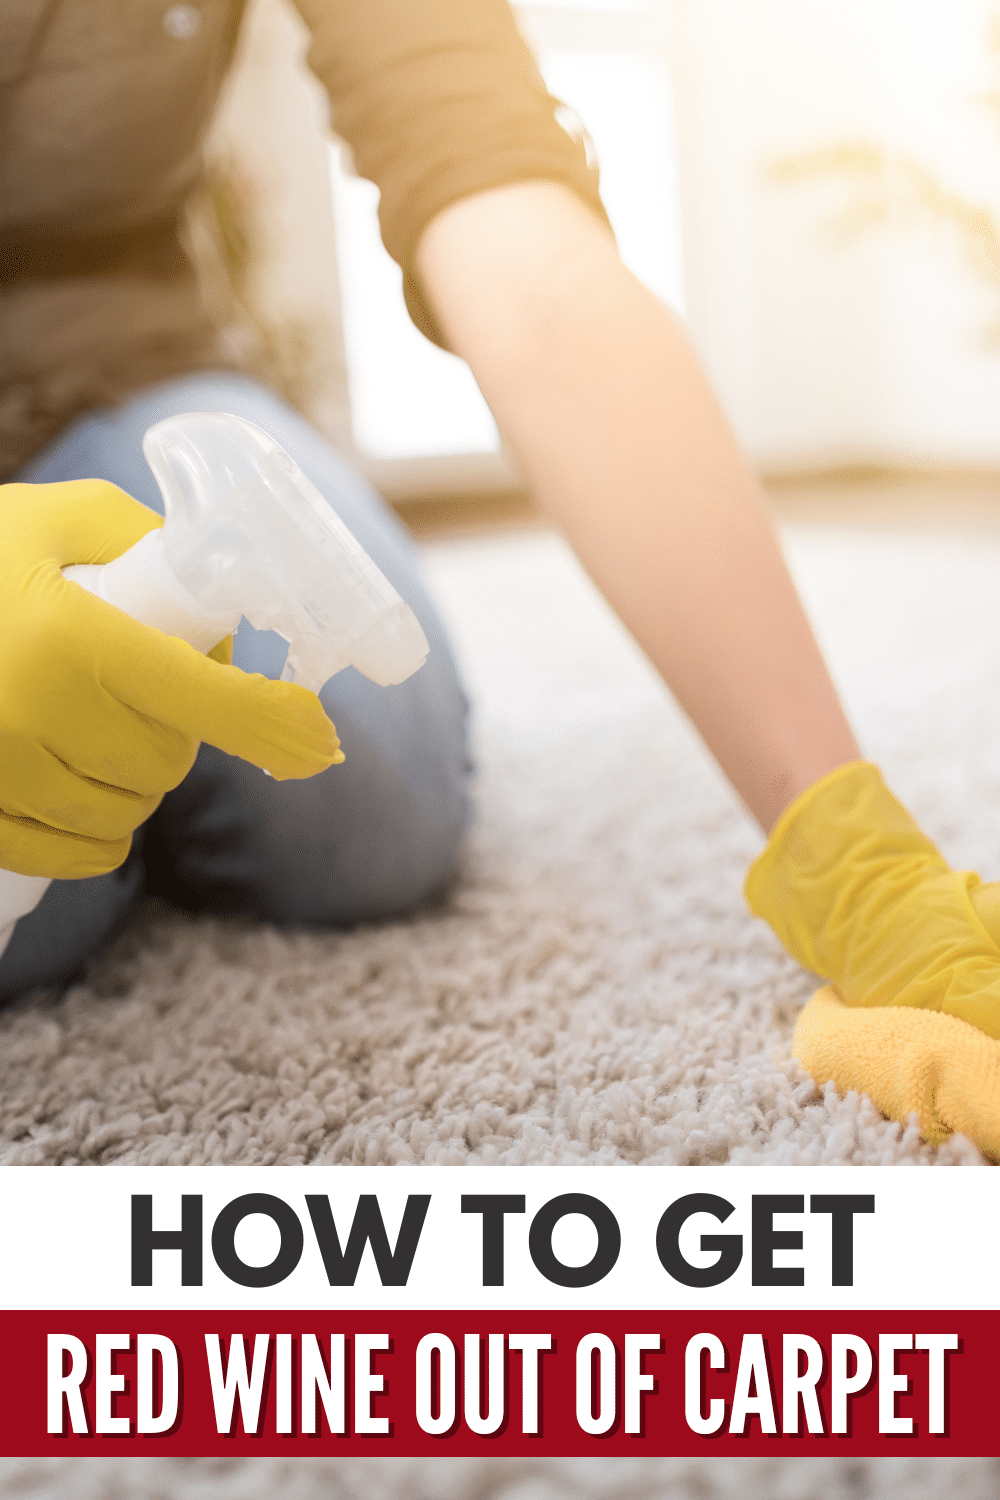 Guide for removing red wine stains from carpet.